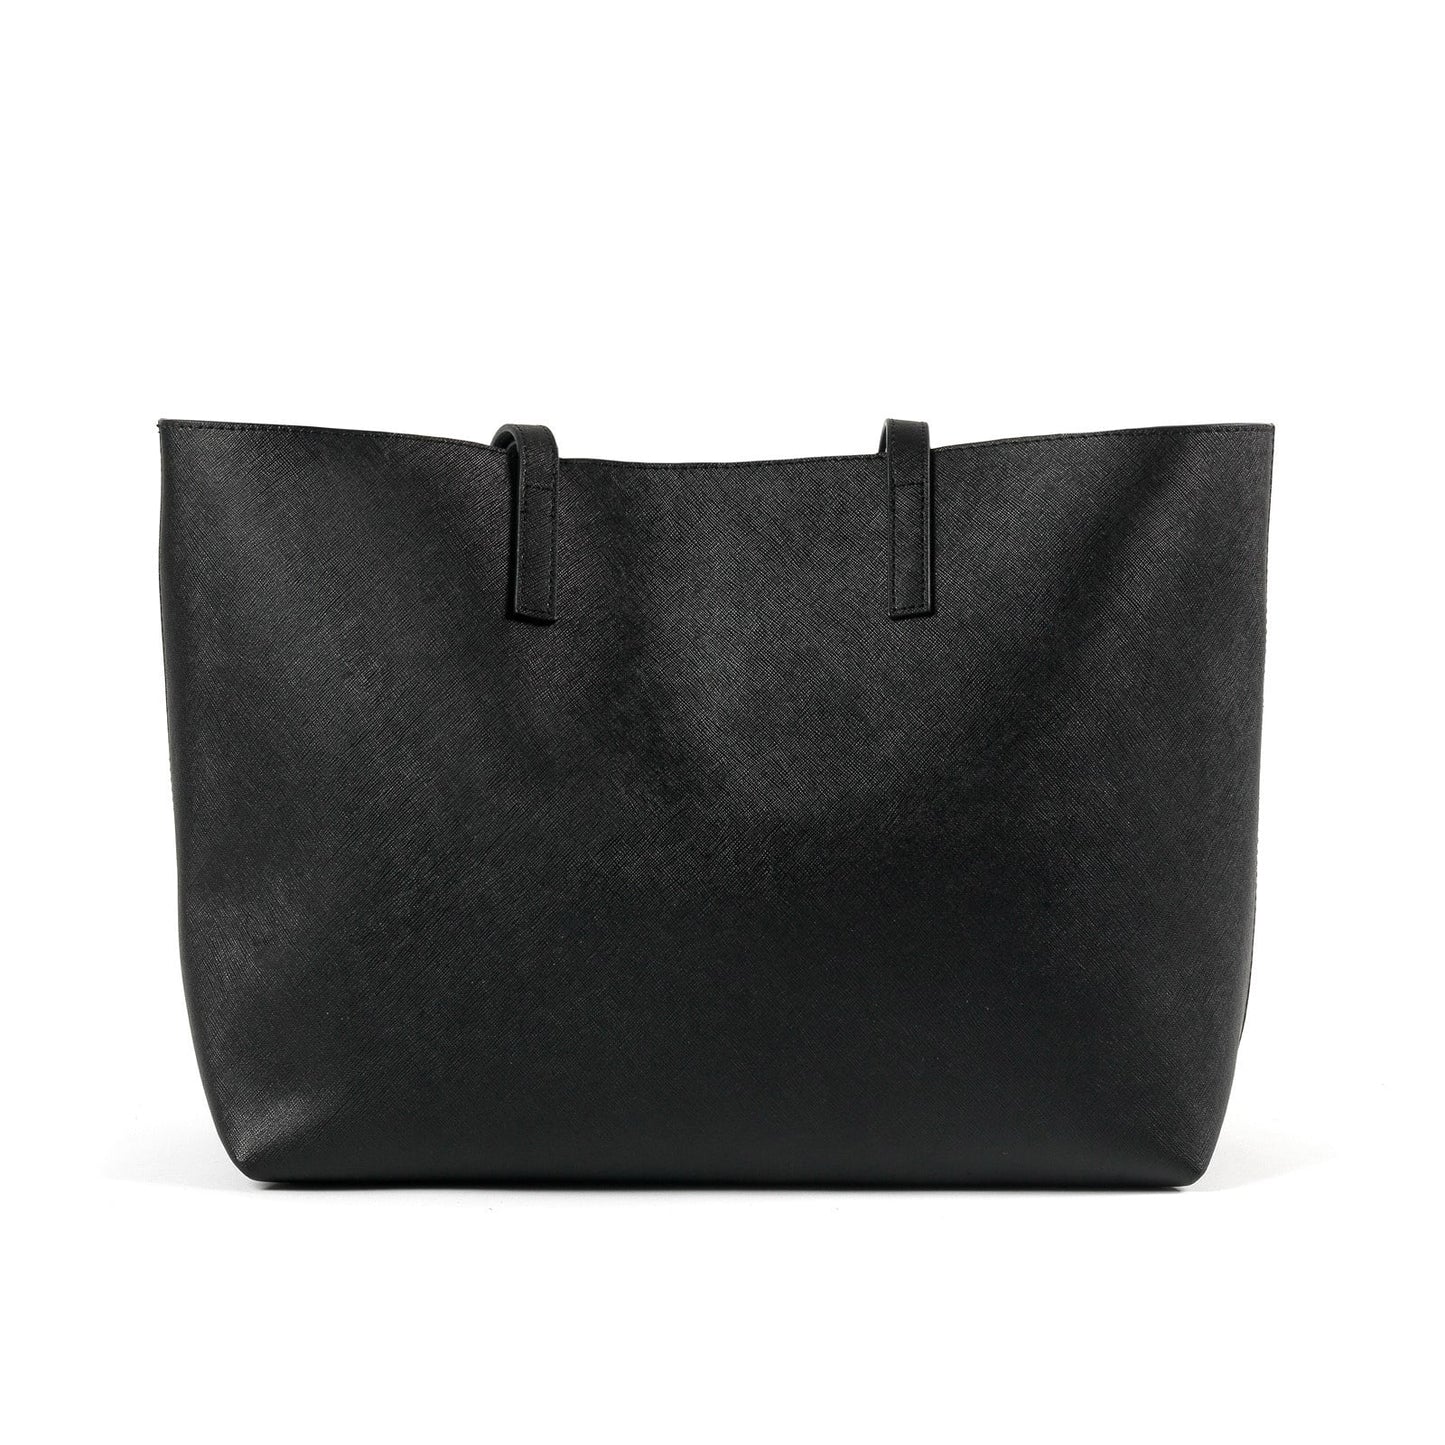 Blank Personalised Black Saffiano Leather Tote